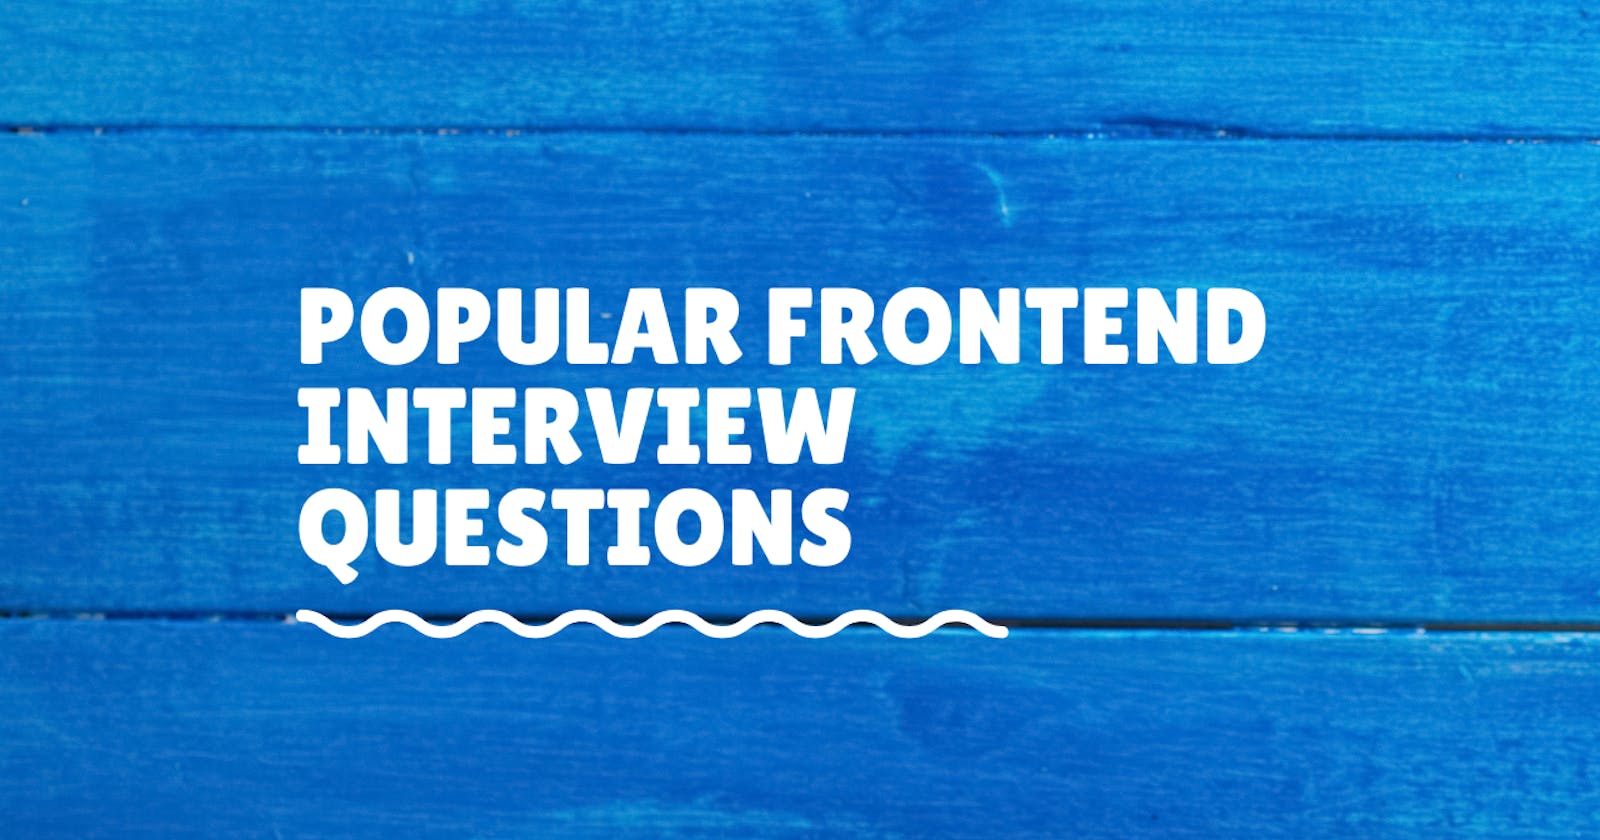 Popular frontend interview questions and answers - Part 1